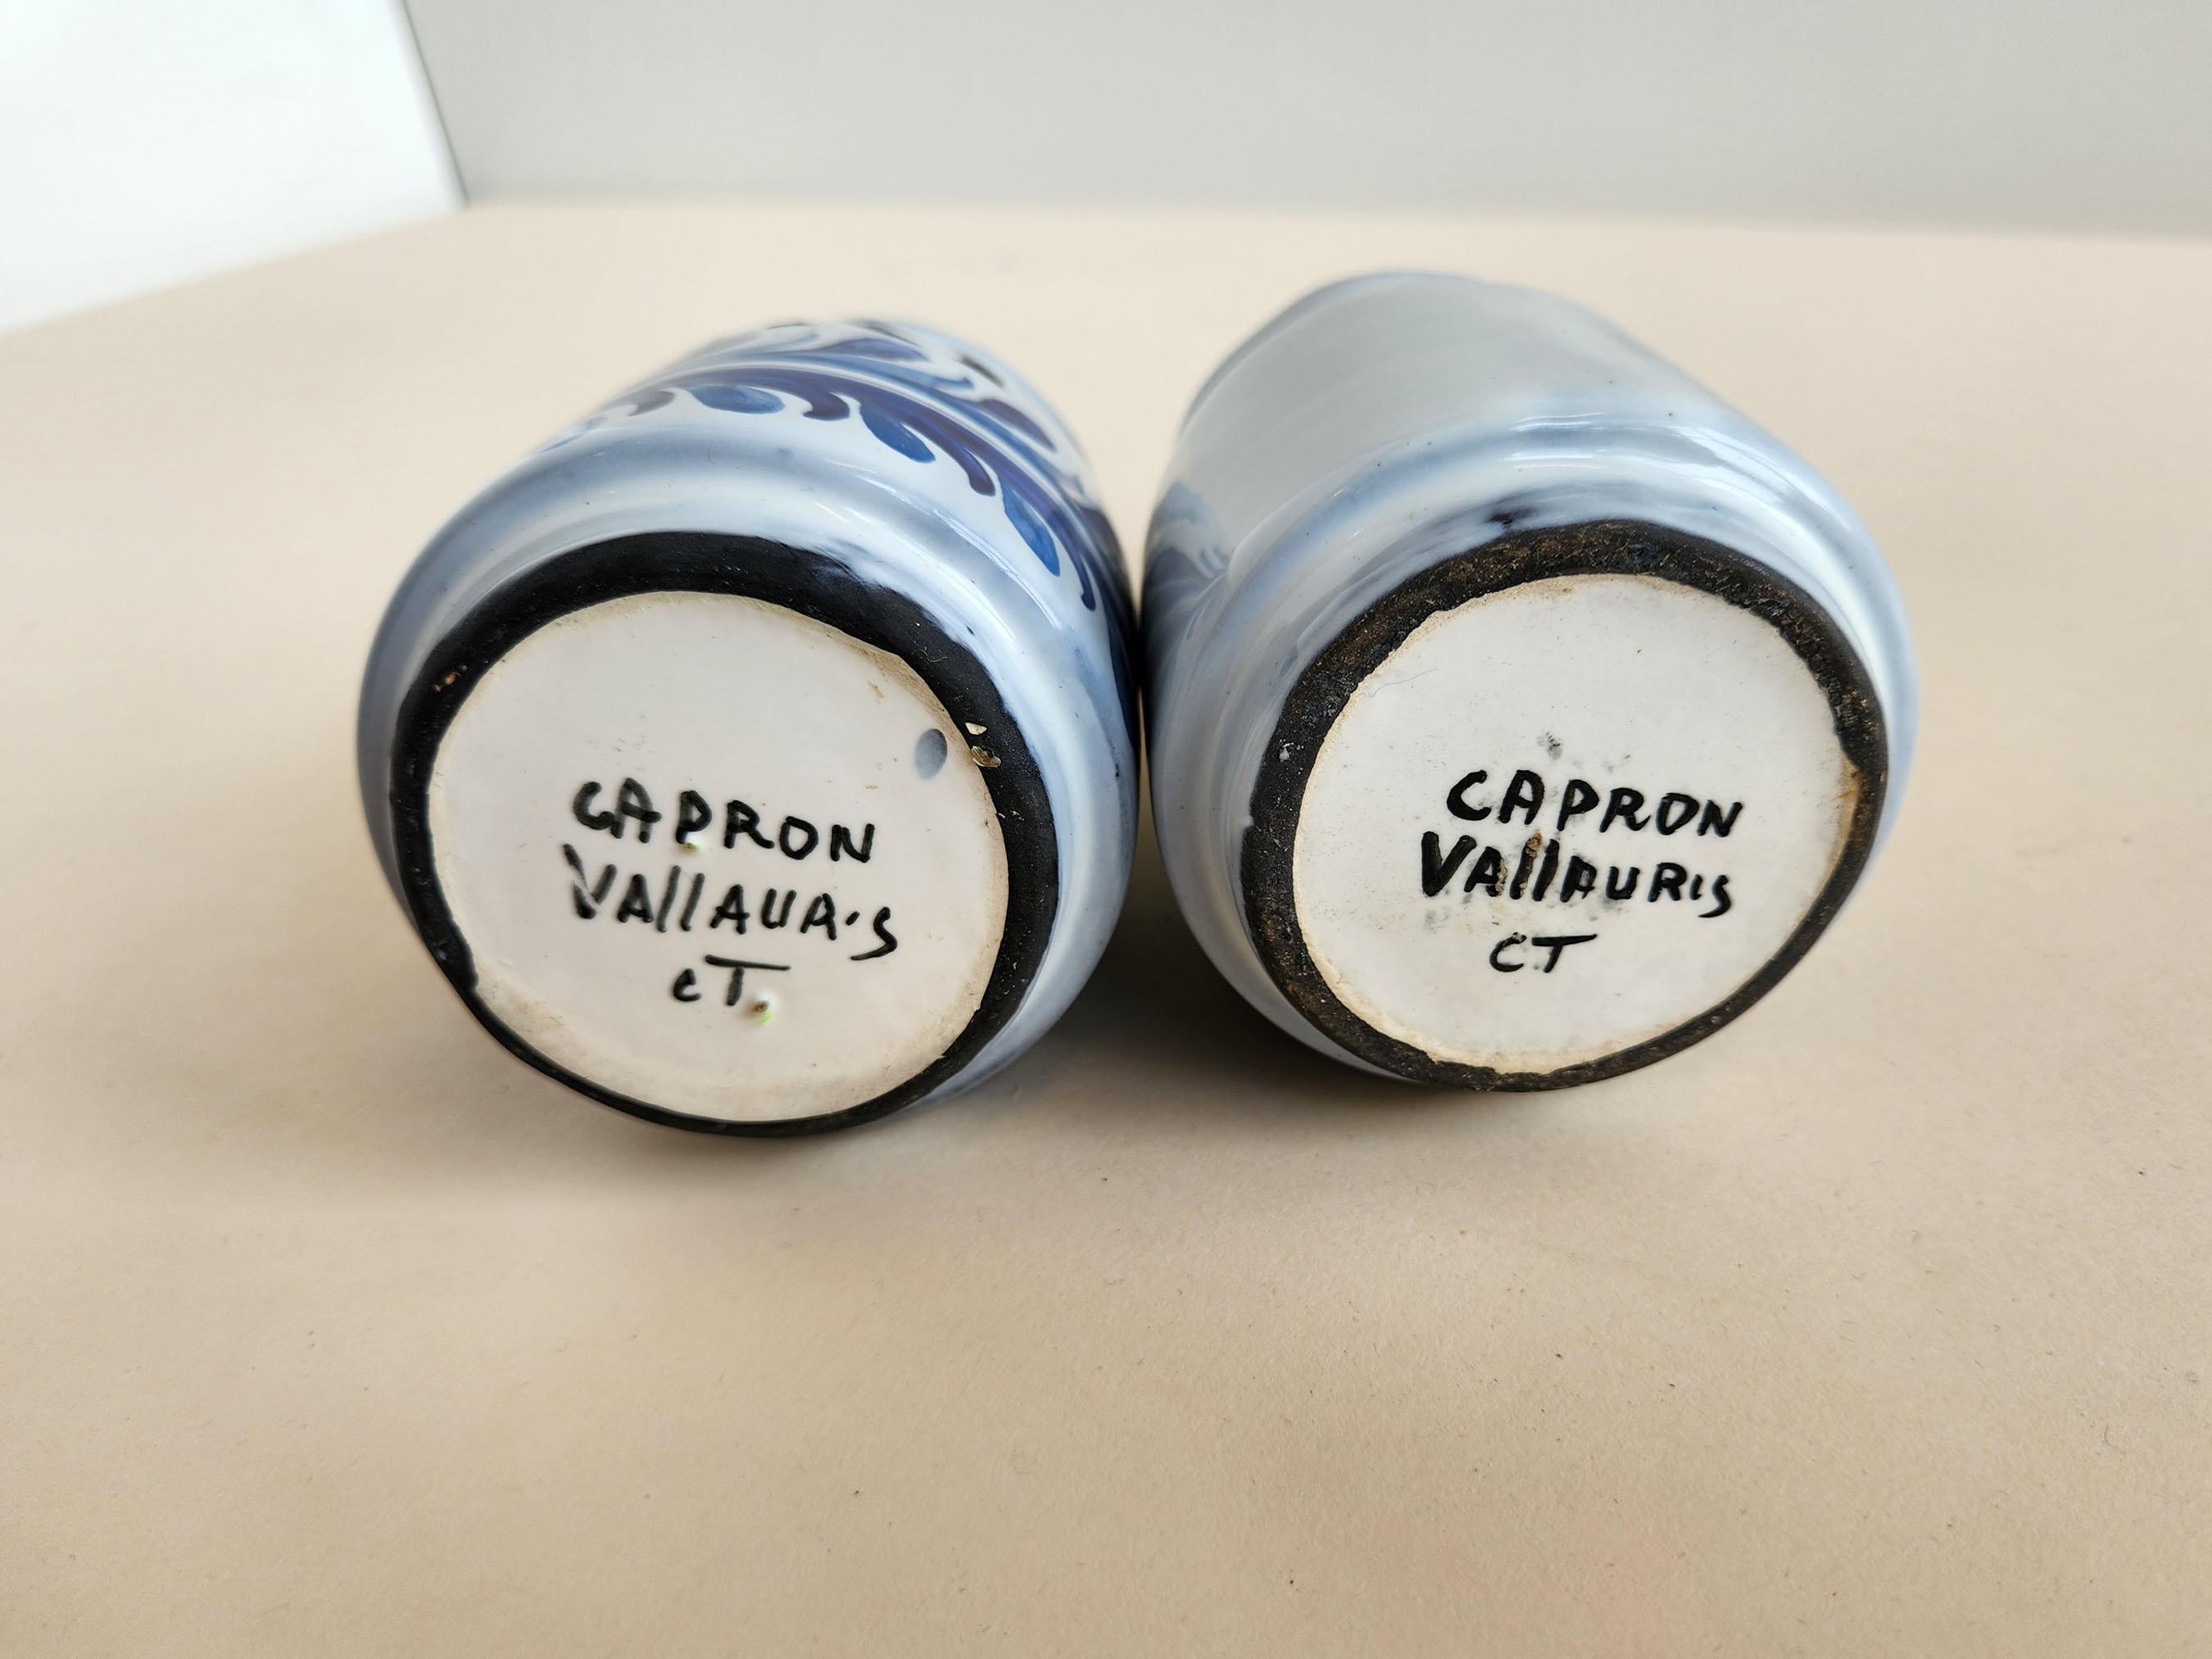 Roger Capron - Vintage Ceramic Jars with Cork Lids for Celery and Thyme For Sale 3